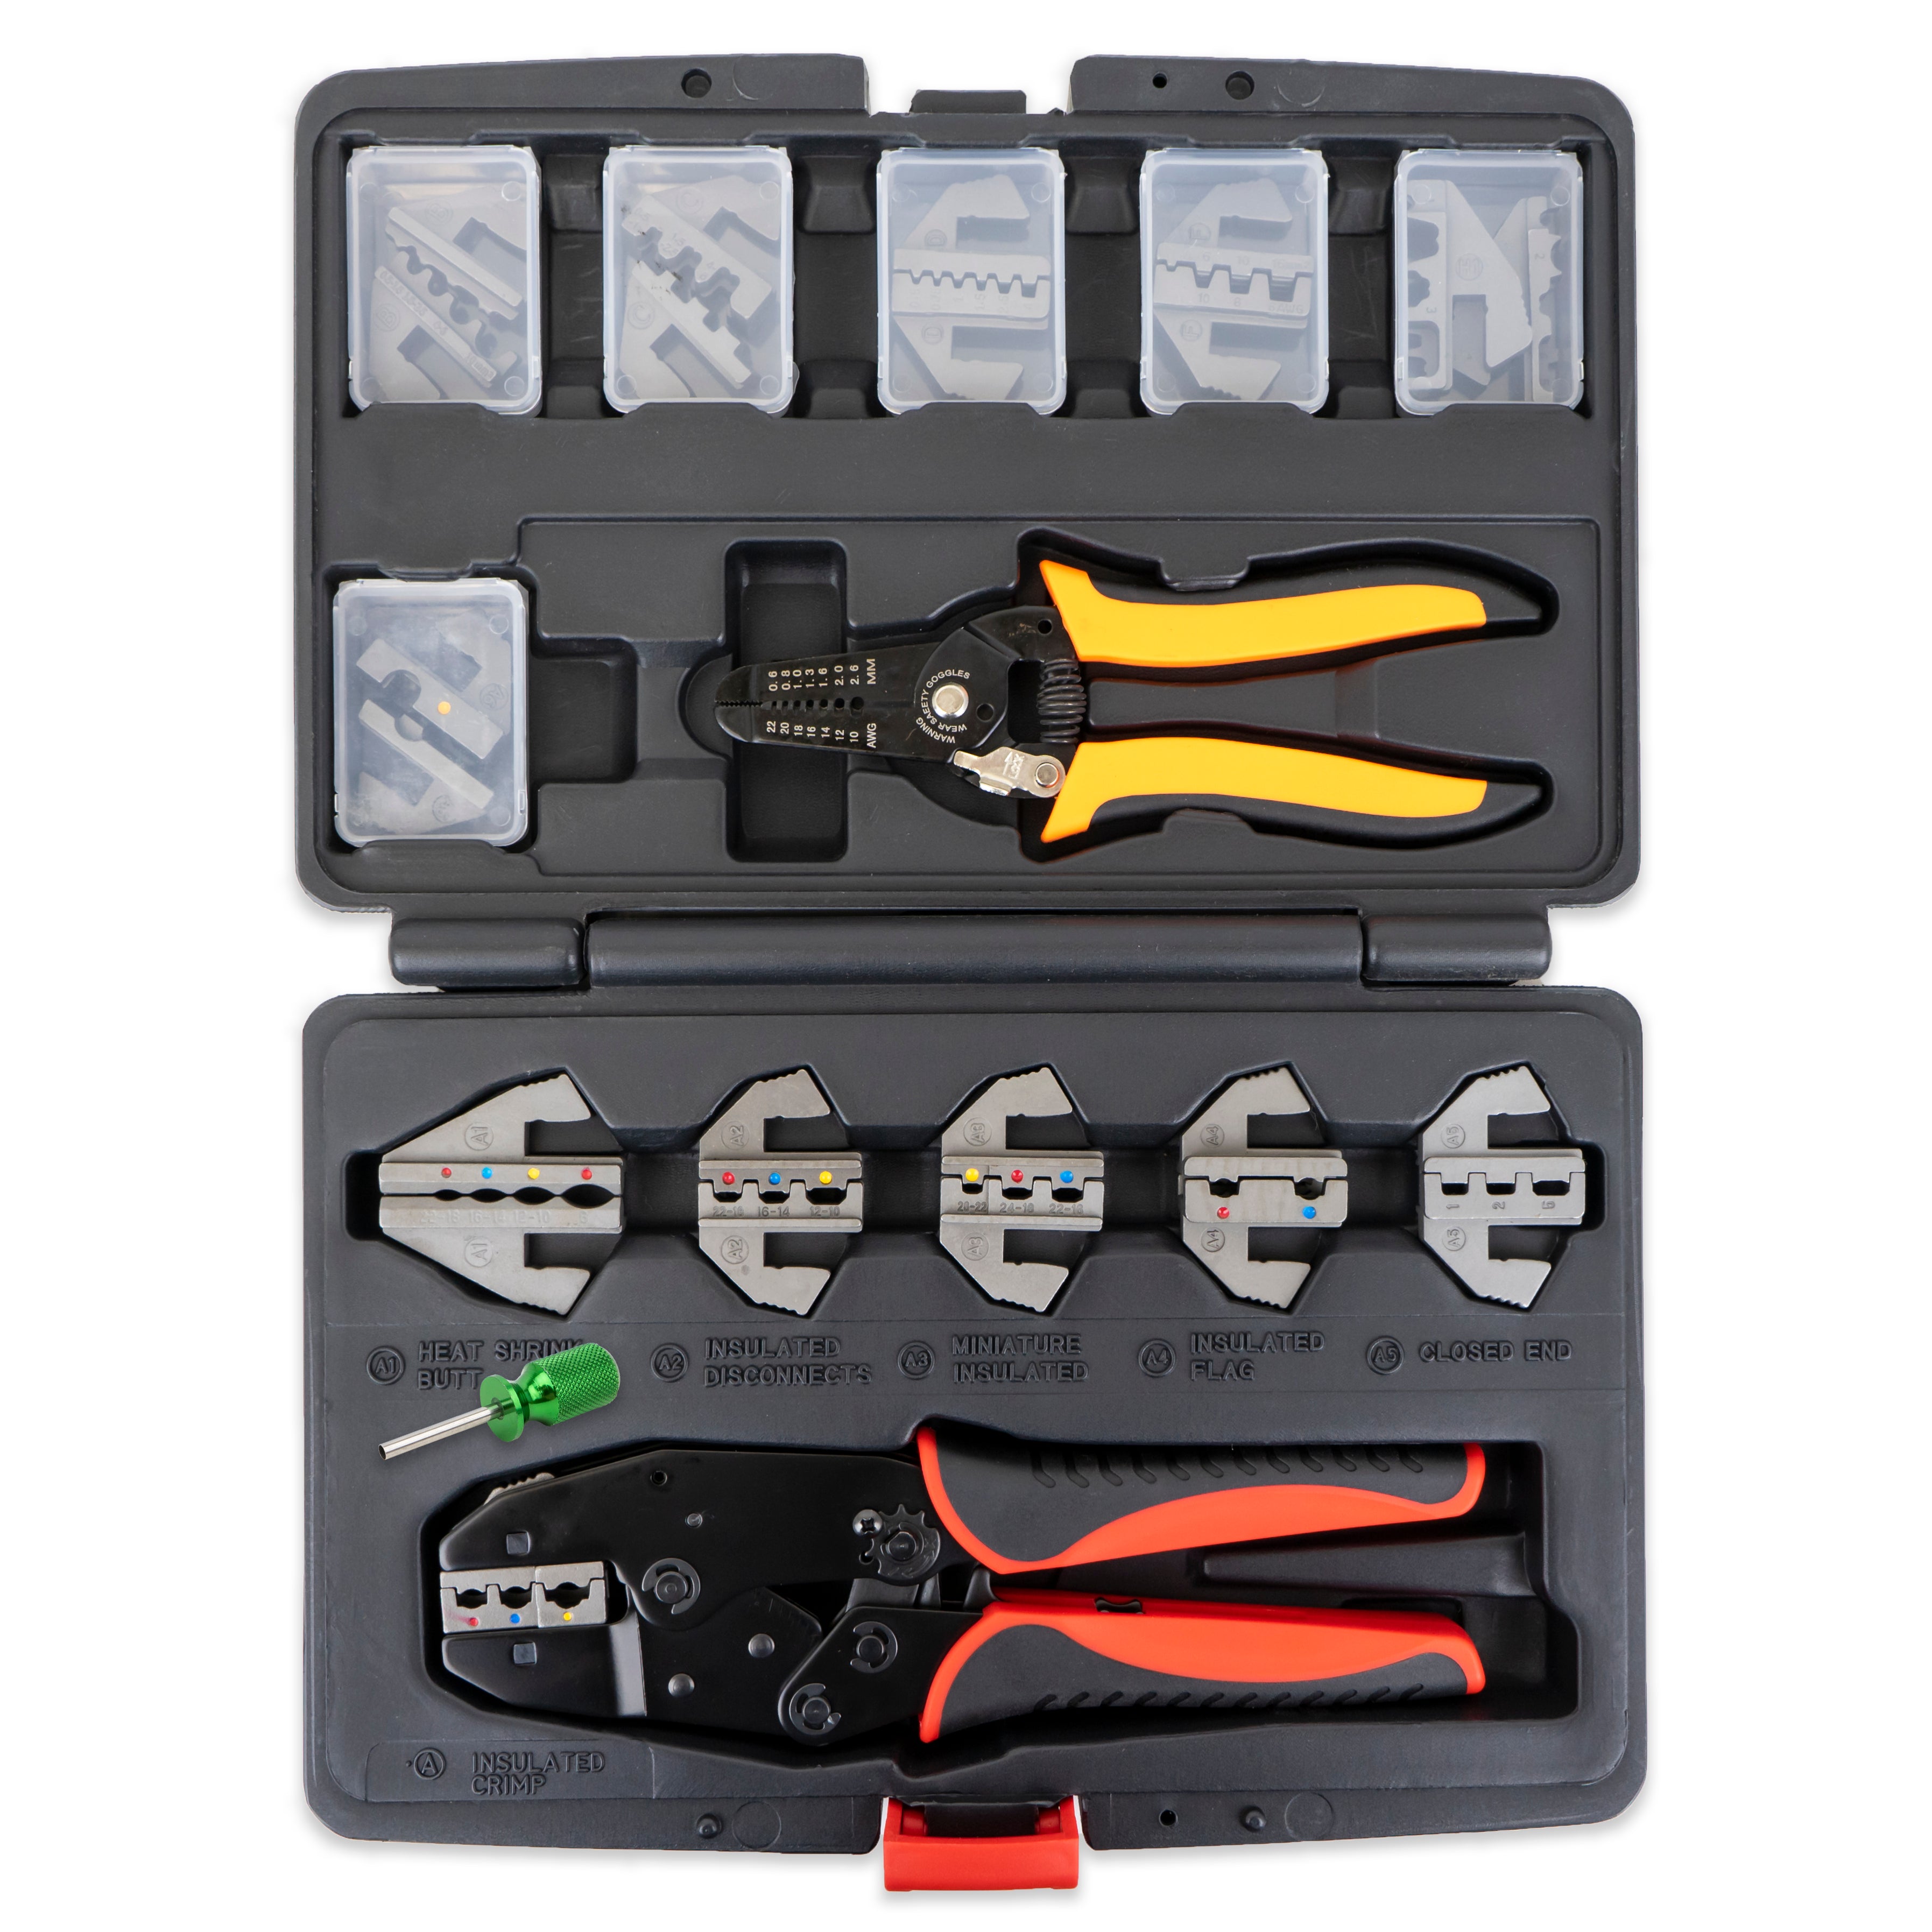 Interchangeable Ratcheting Terminal Crimper Set - 12 Die Sets with Wire Strippers (Insulated, Superseal, Weatherpack)